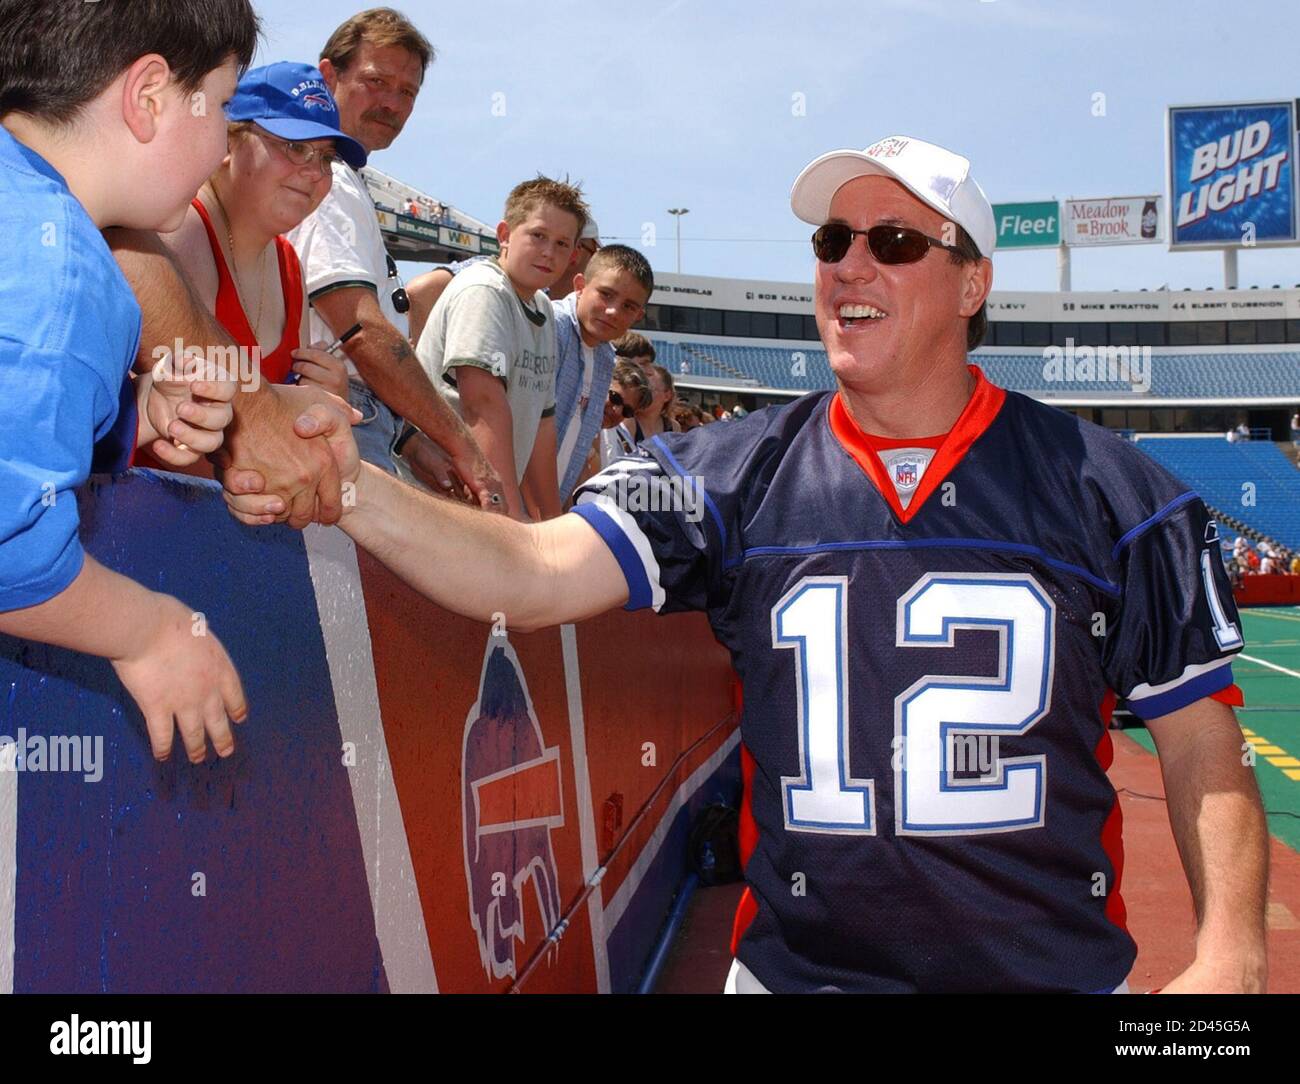 Retired Buffalo Bills quarterback Jim Kelly greets fans in the new Buffalo  Bills jersey on June 8, 2002. About 20,000 fans came out to Ralph Wilson  Stadium in Orchard Park, NY, to